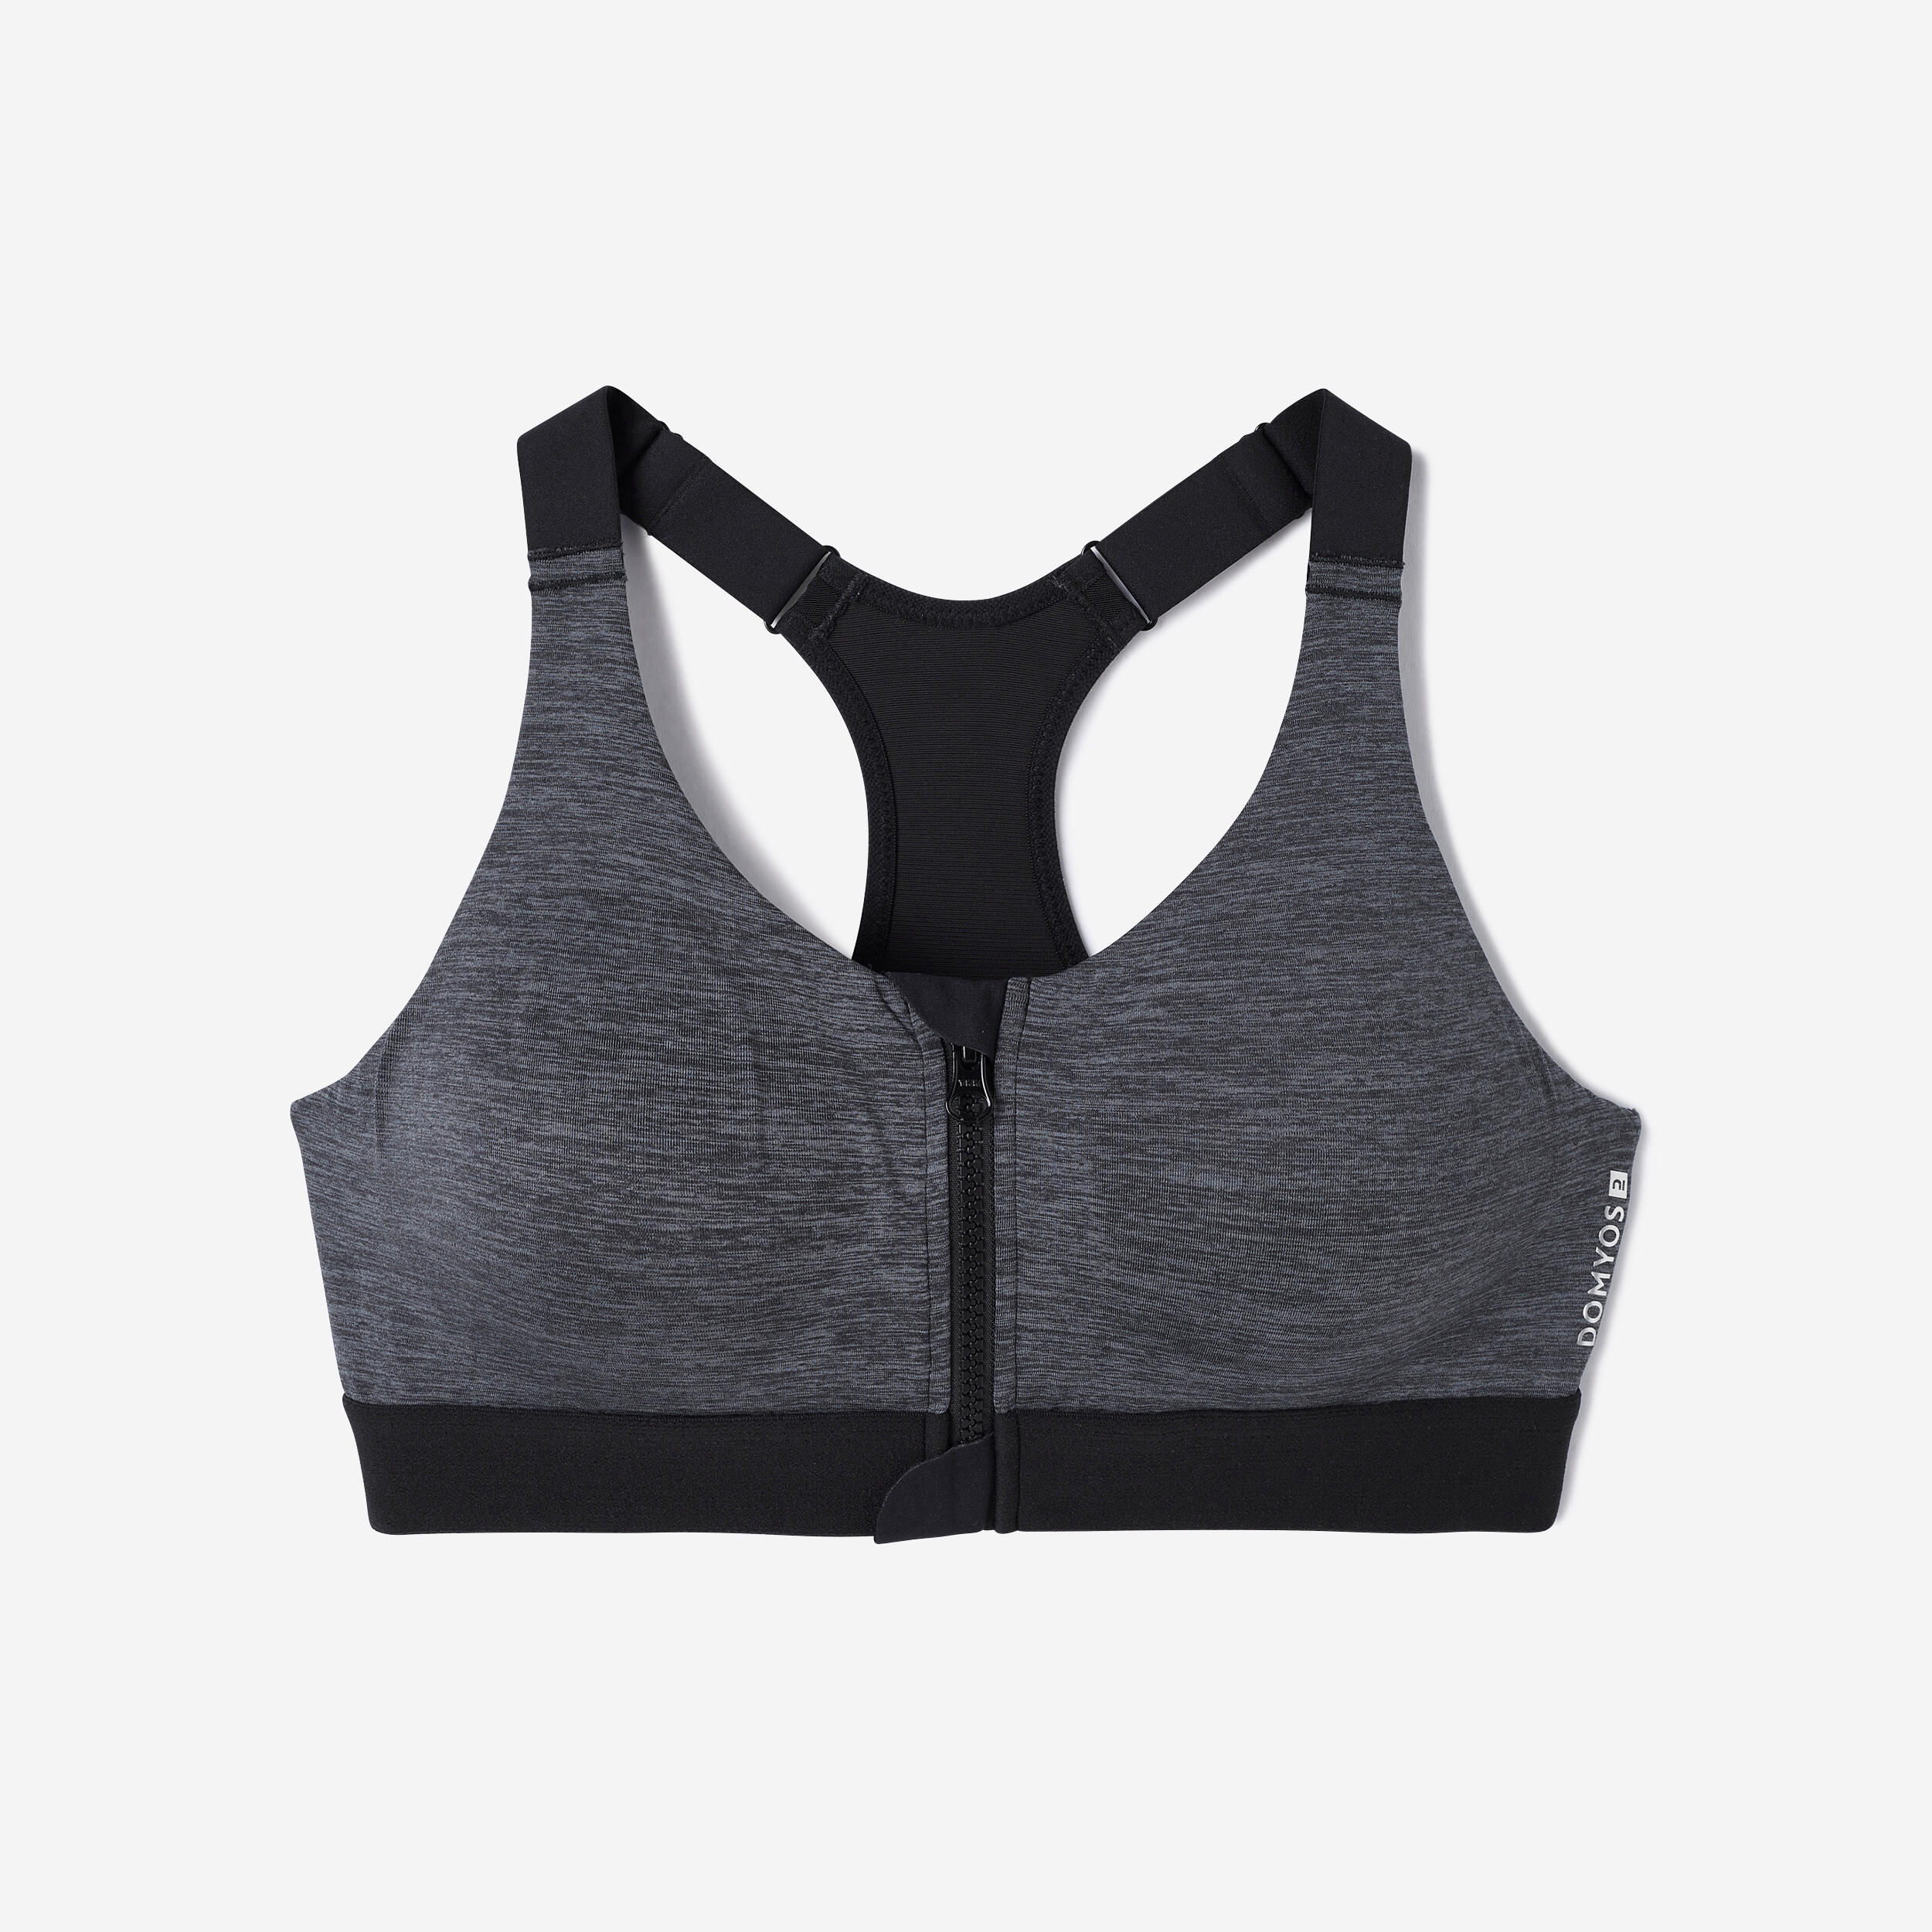 Buy Domyos by Decathlon Grey Graphic Workout Bra 8667270 at